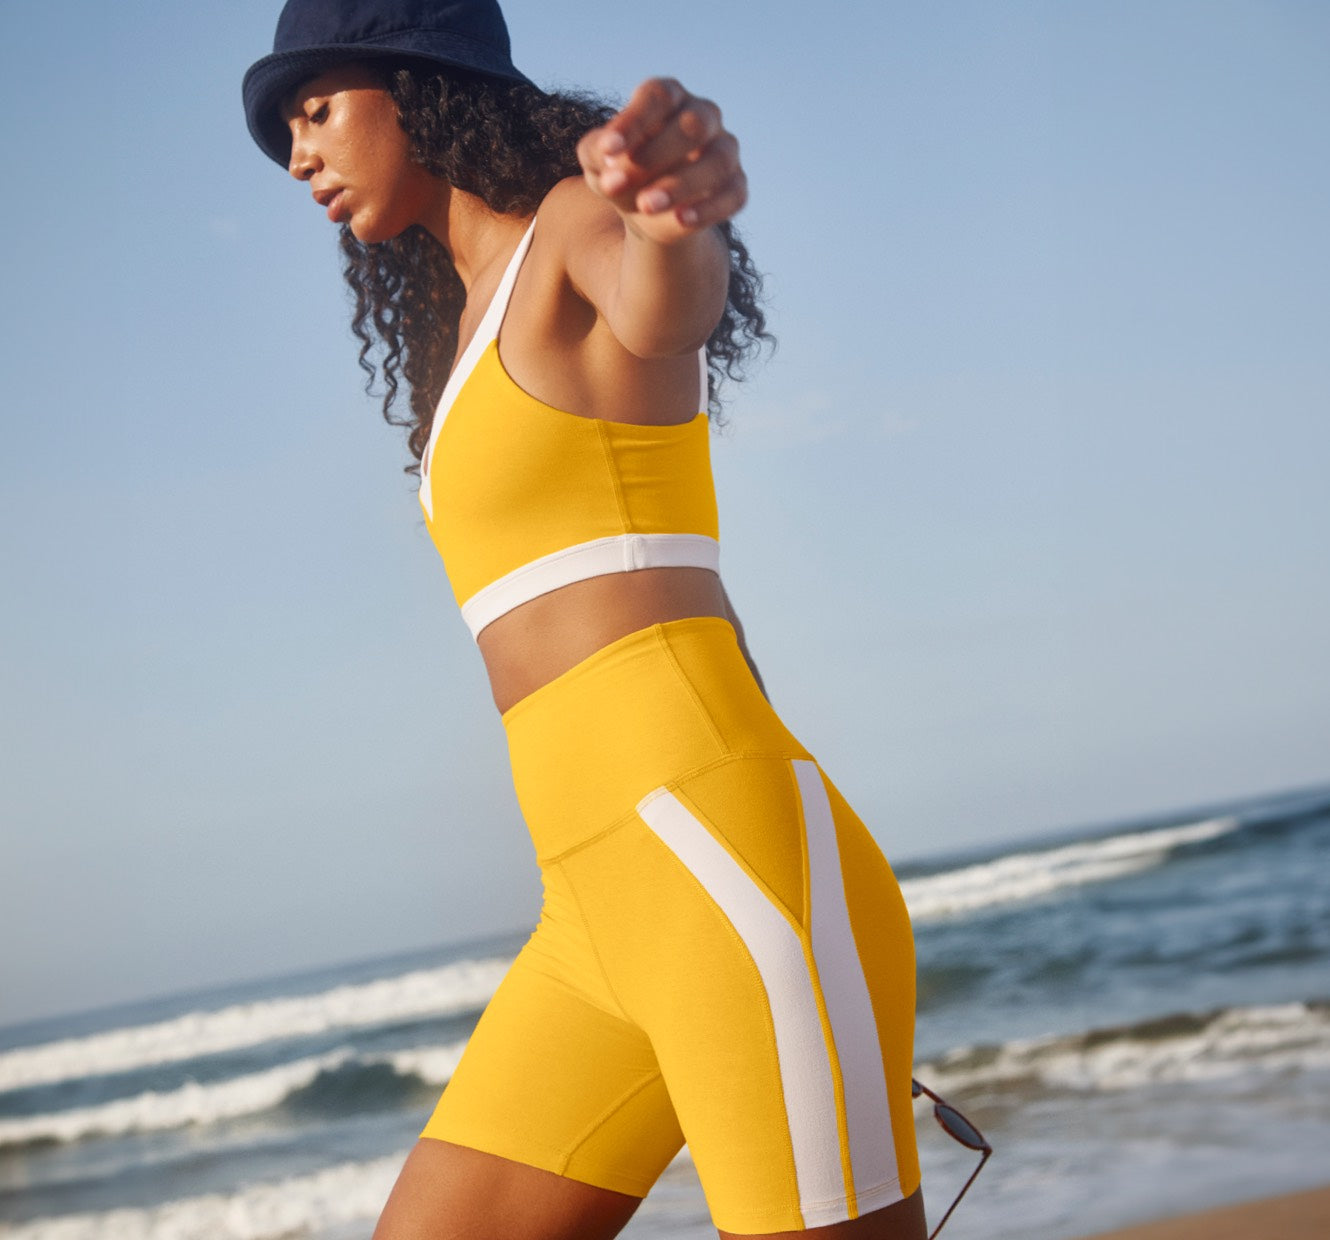 model is wearing a yellow bra top with white outline details and yellow high-waisted biker shorts with white outline detailing. 